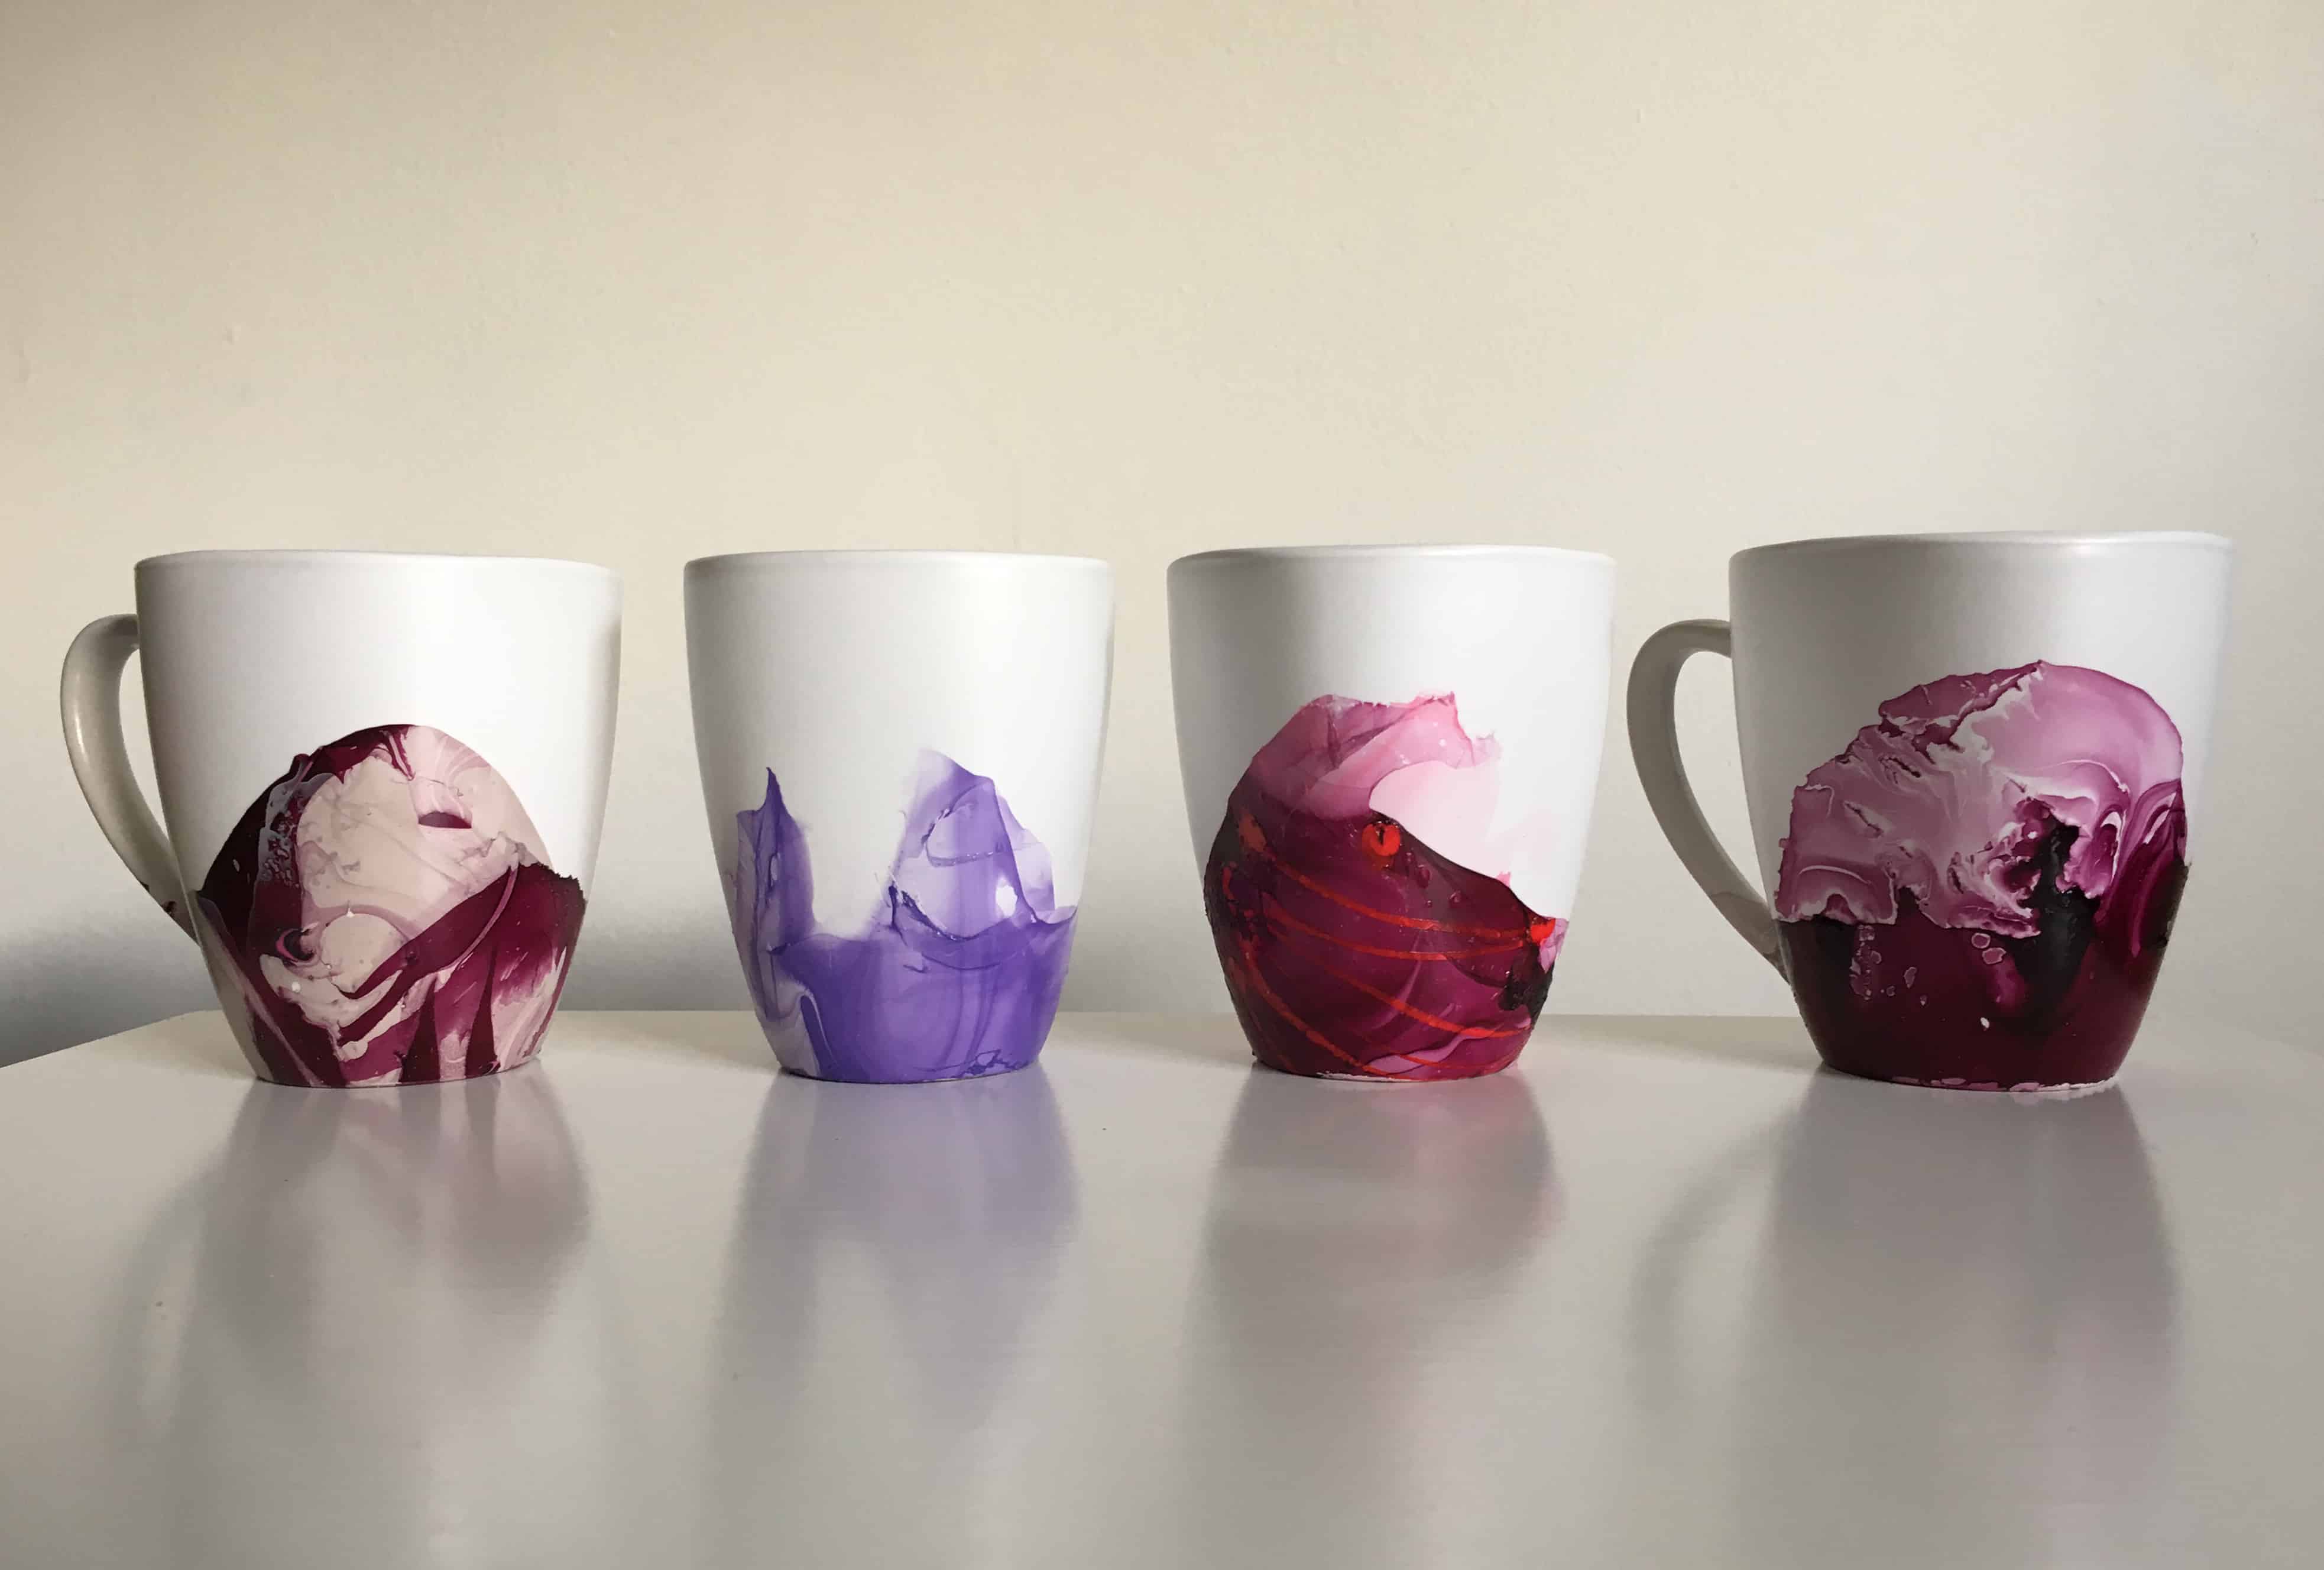 DIY Christmas Gifts like these marbled mugs are perfect